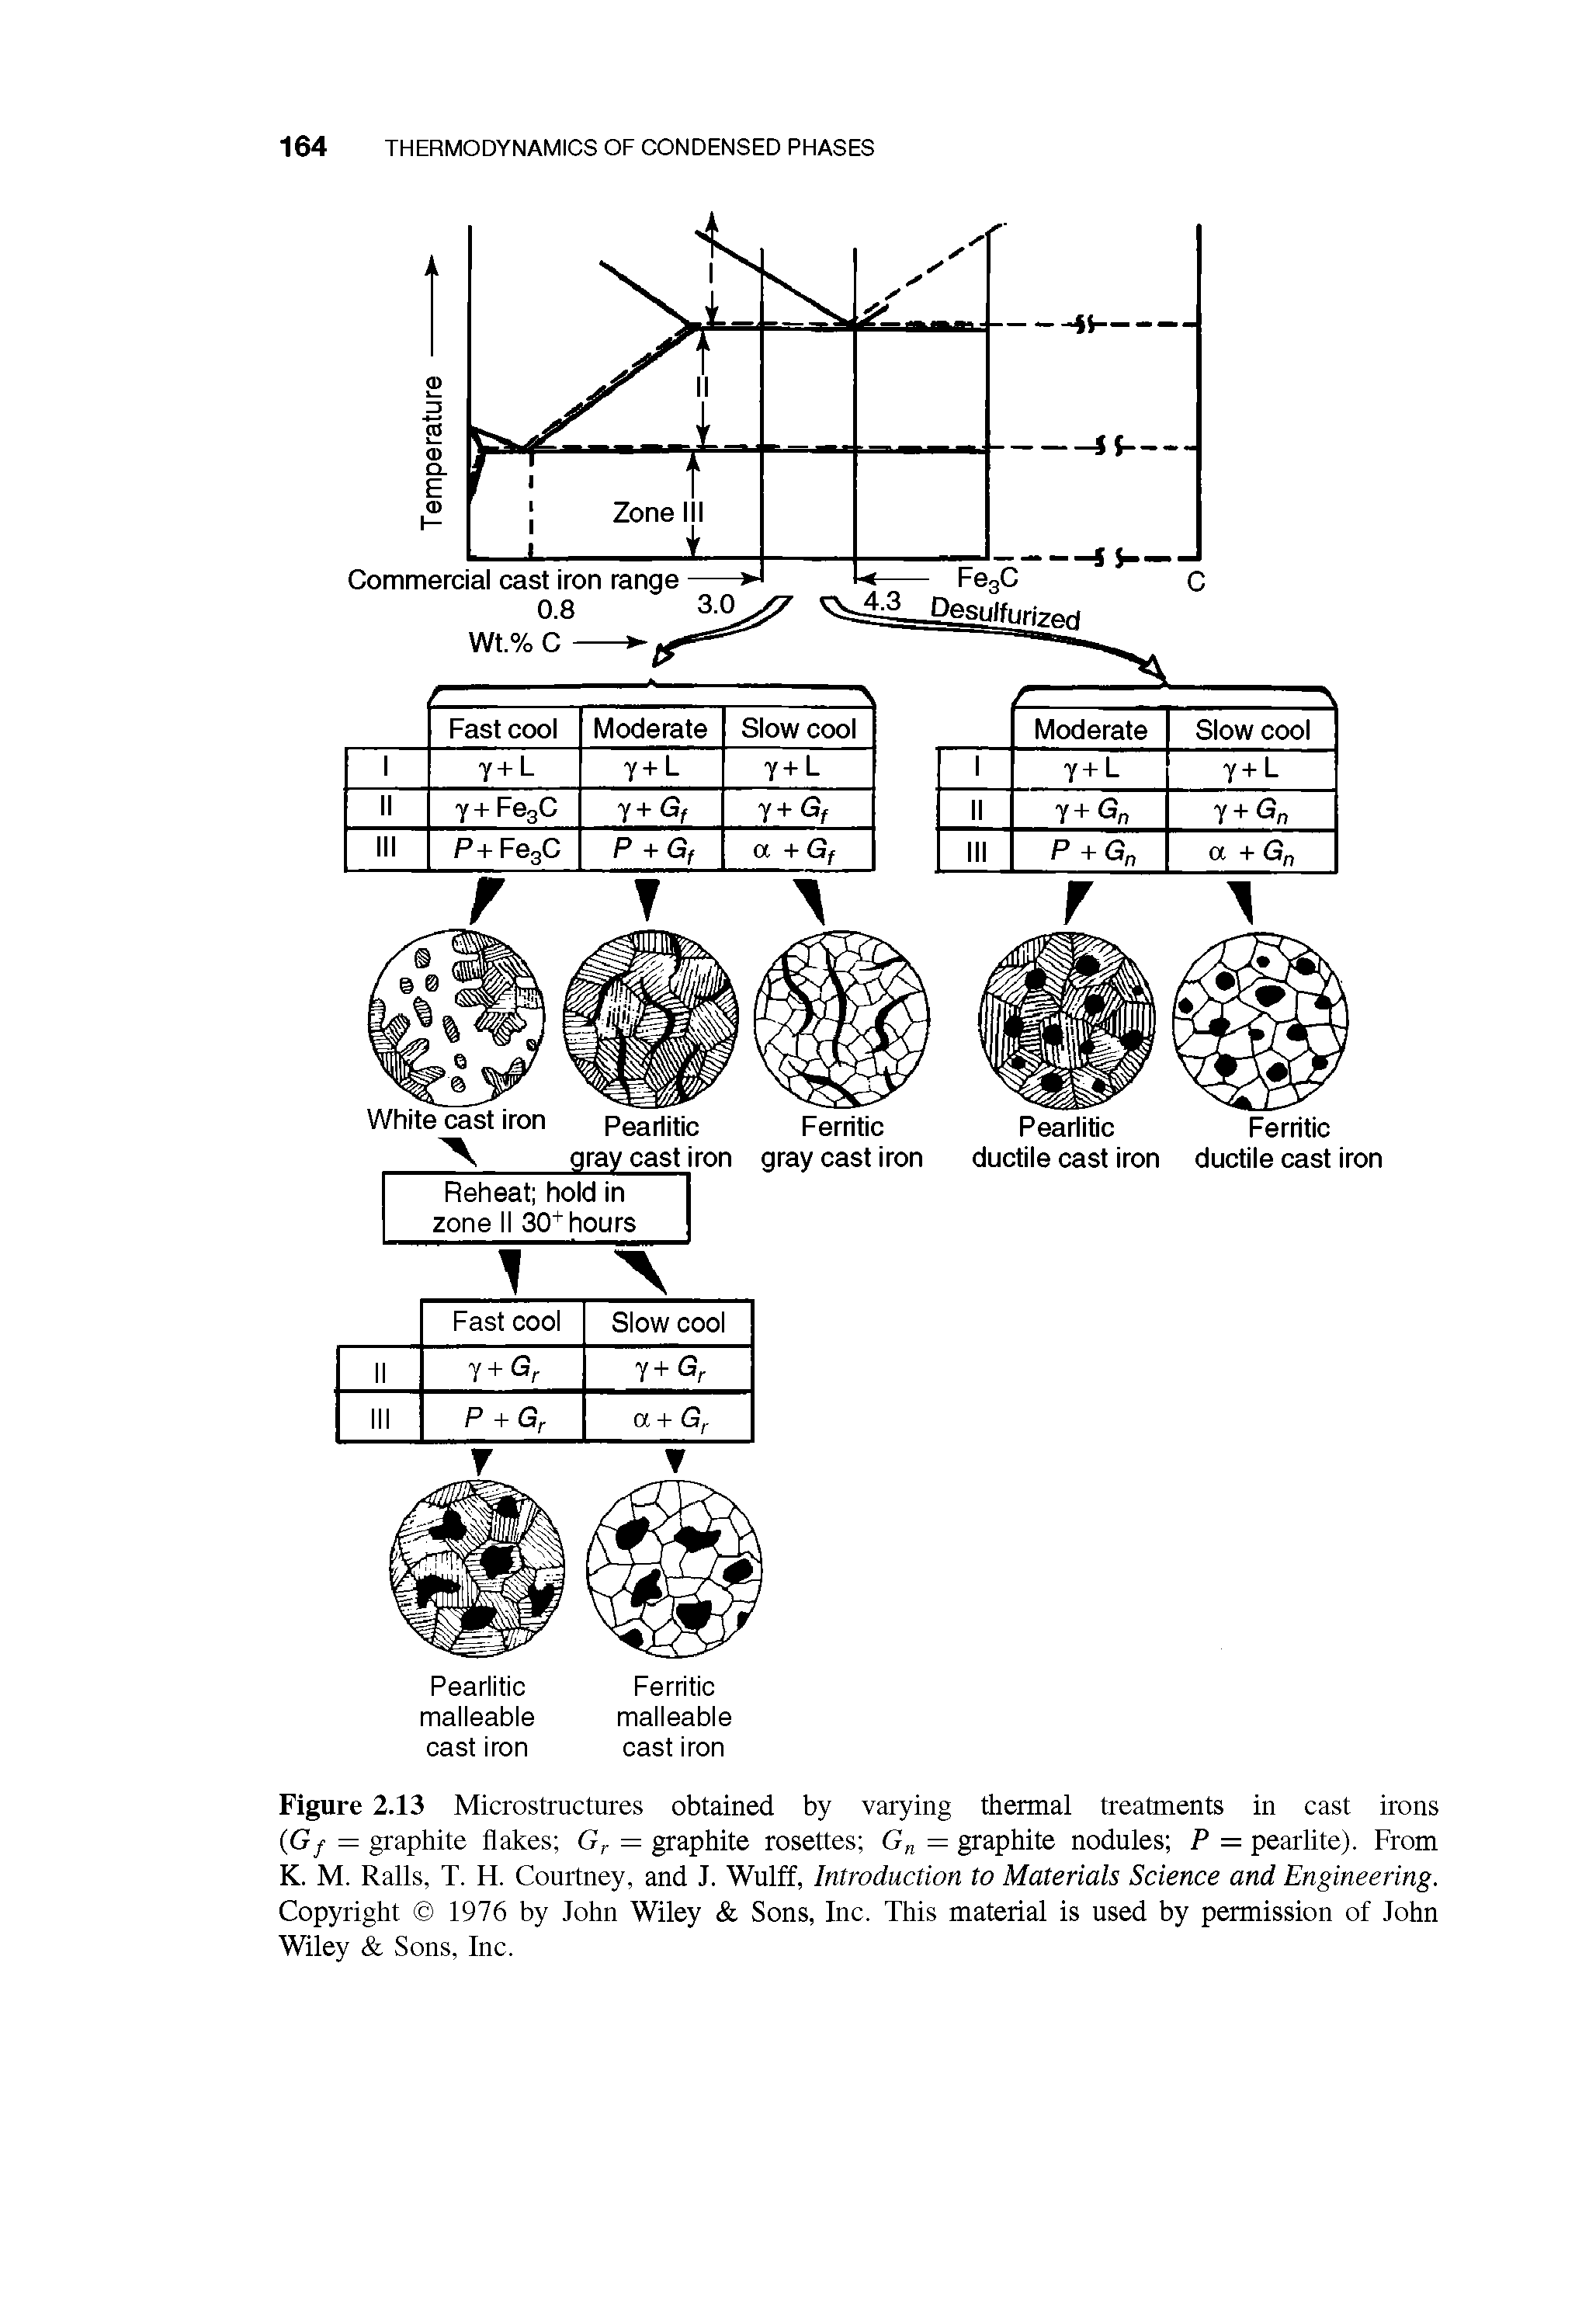 Figure 2.13 Microstructures obtained by varying thermal treatments in cast irons (Gf = graphite flakes = graphite rosettes G = graphite nodules P = pearlite). From K. M. Ralls, T. H. Courtney, and J. Wulff, Introduction to Materials Science and Engineering. Copyright 1976 by John Wiley Sons, Inc. This material is used by permission of John Wiley Sons, Inc.